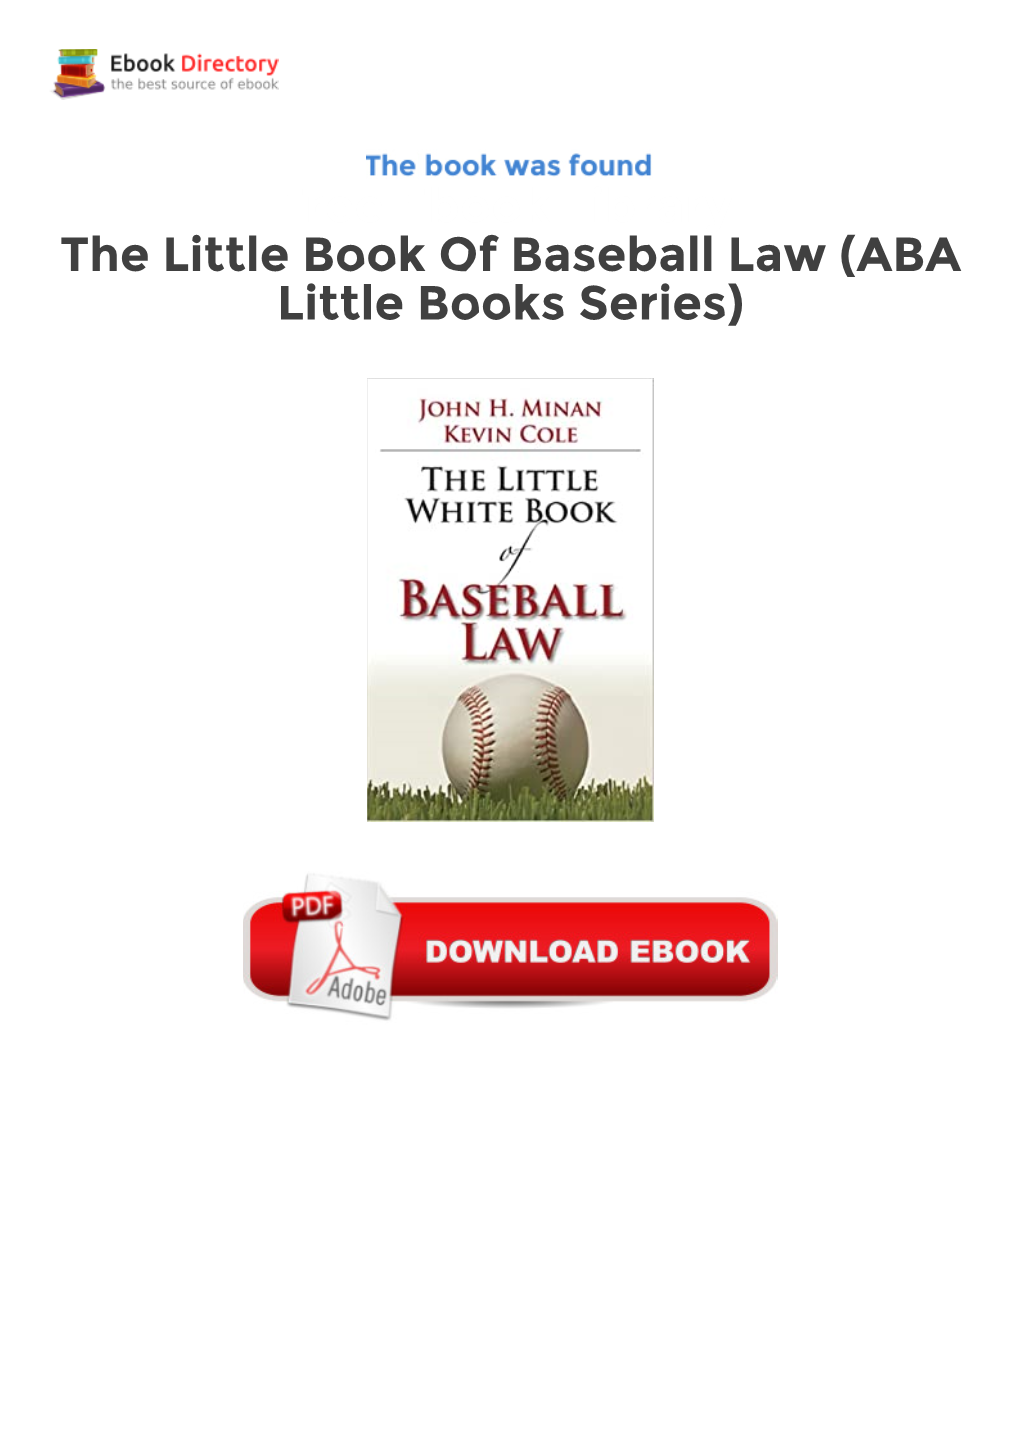 Free Ebook Library the Little Book of Baseball Law (ABA Little